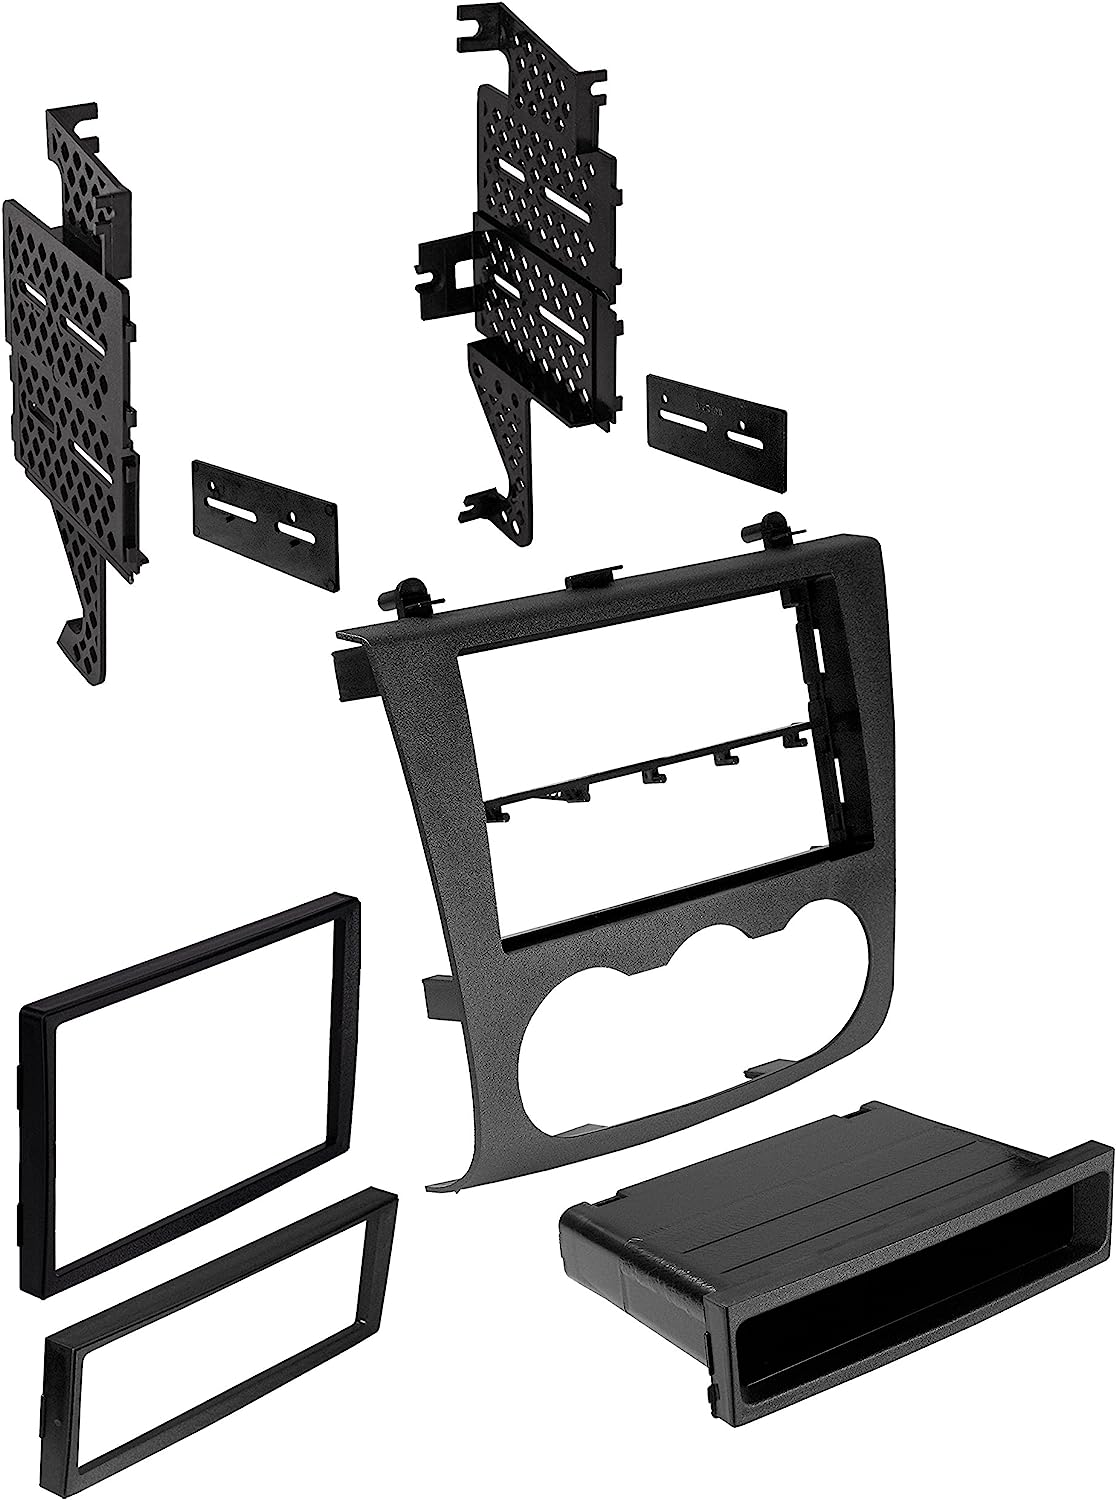 Absolute Package2  Car Stereo Installation Kit Compatible with Nissan Altima Sedan or Coupe 2007-2012 In-Dash Mounting Kit, Antenna, and Harness for Single or Double Din Radio Receivers